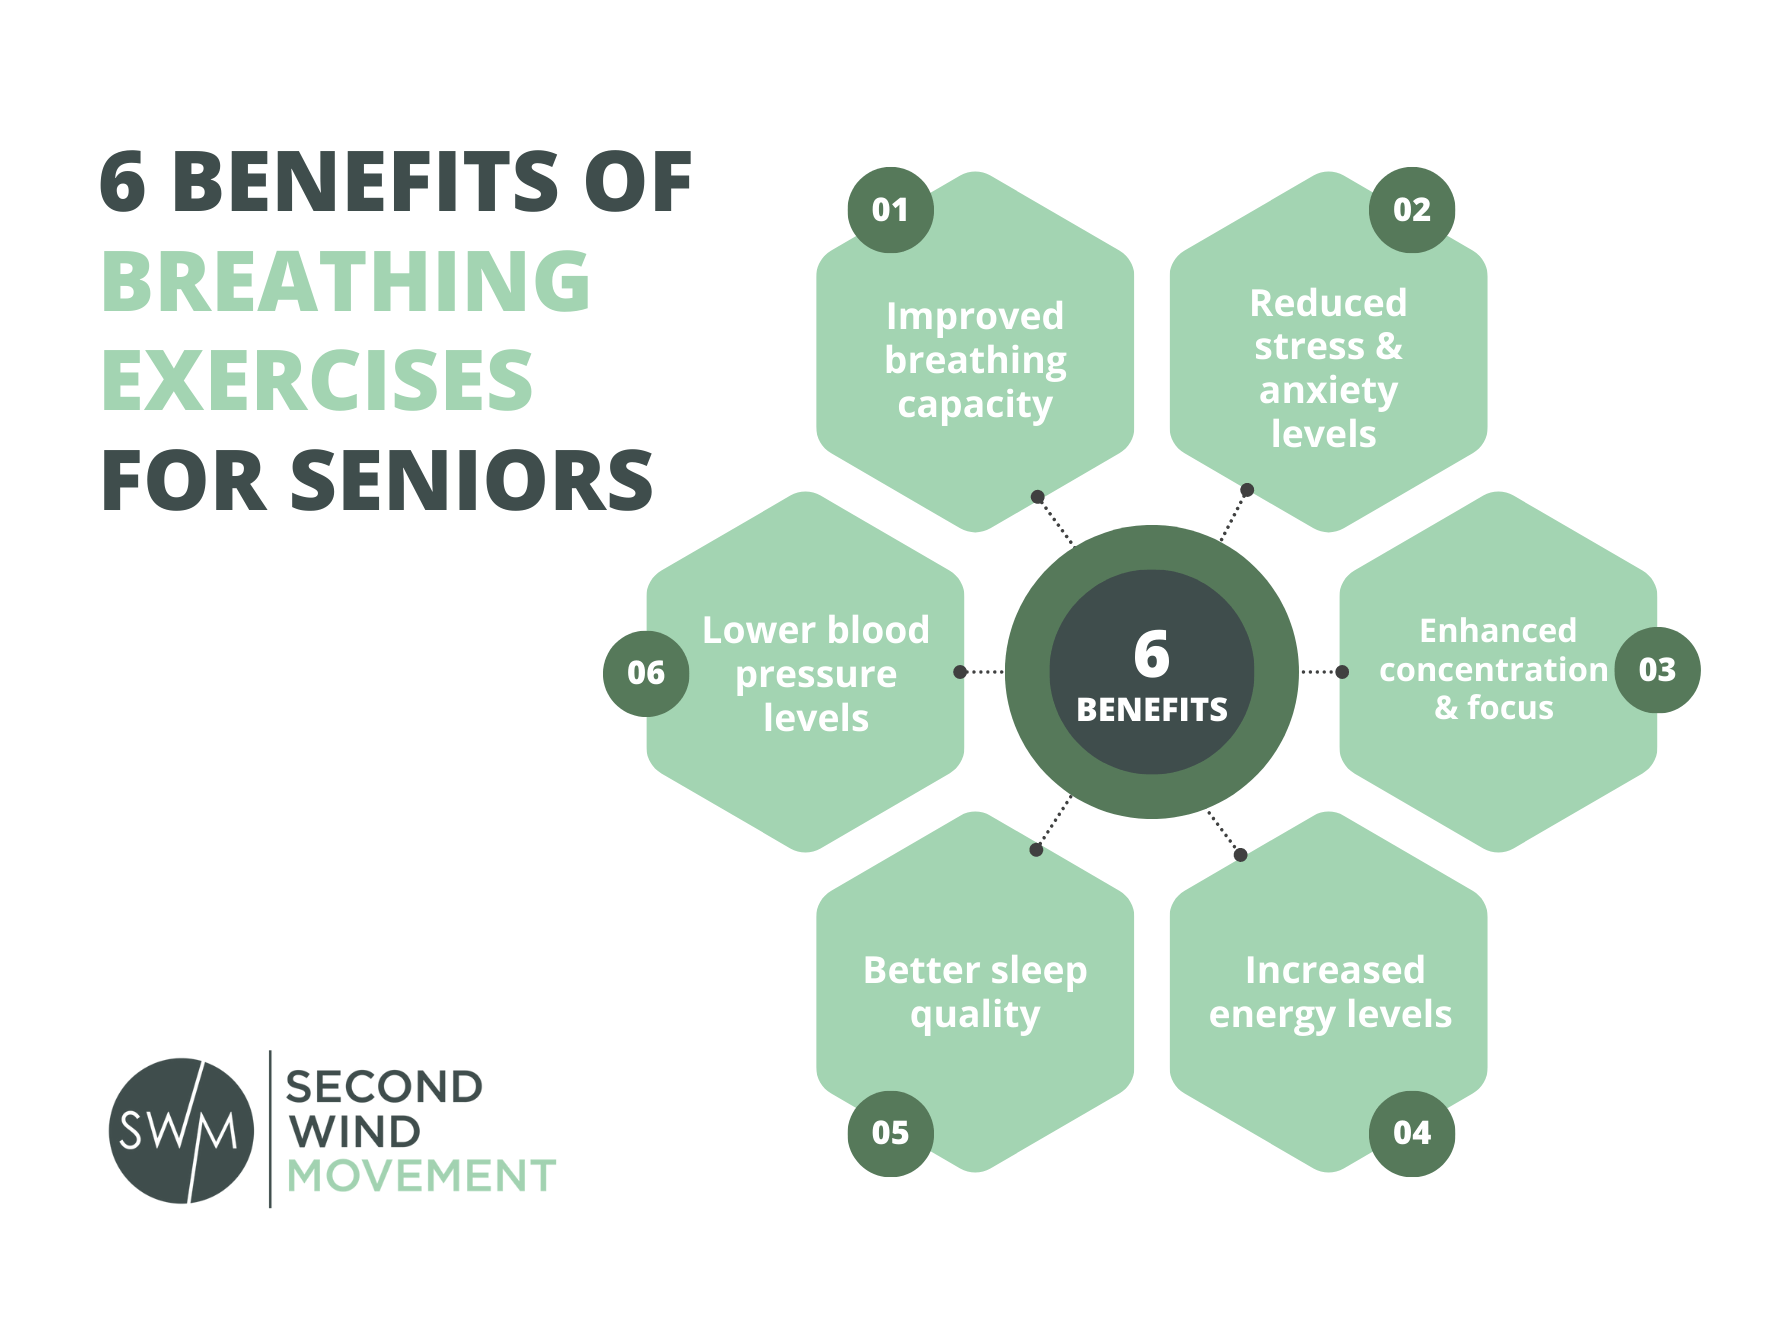 6 benefits of breathing exercises for seniors: improved breathing capacity, reduced stress and anxiety levels, enhanced concentration and focus, increased energy levels, better sleep quality, and lower blood pressure levels